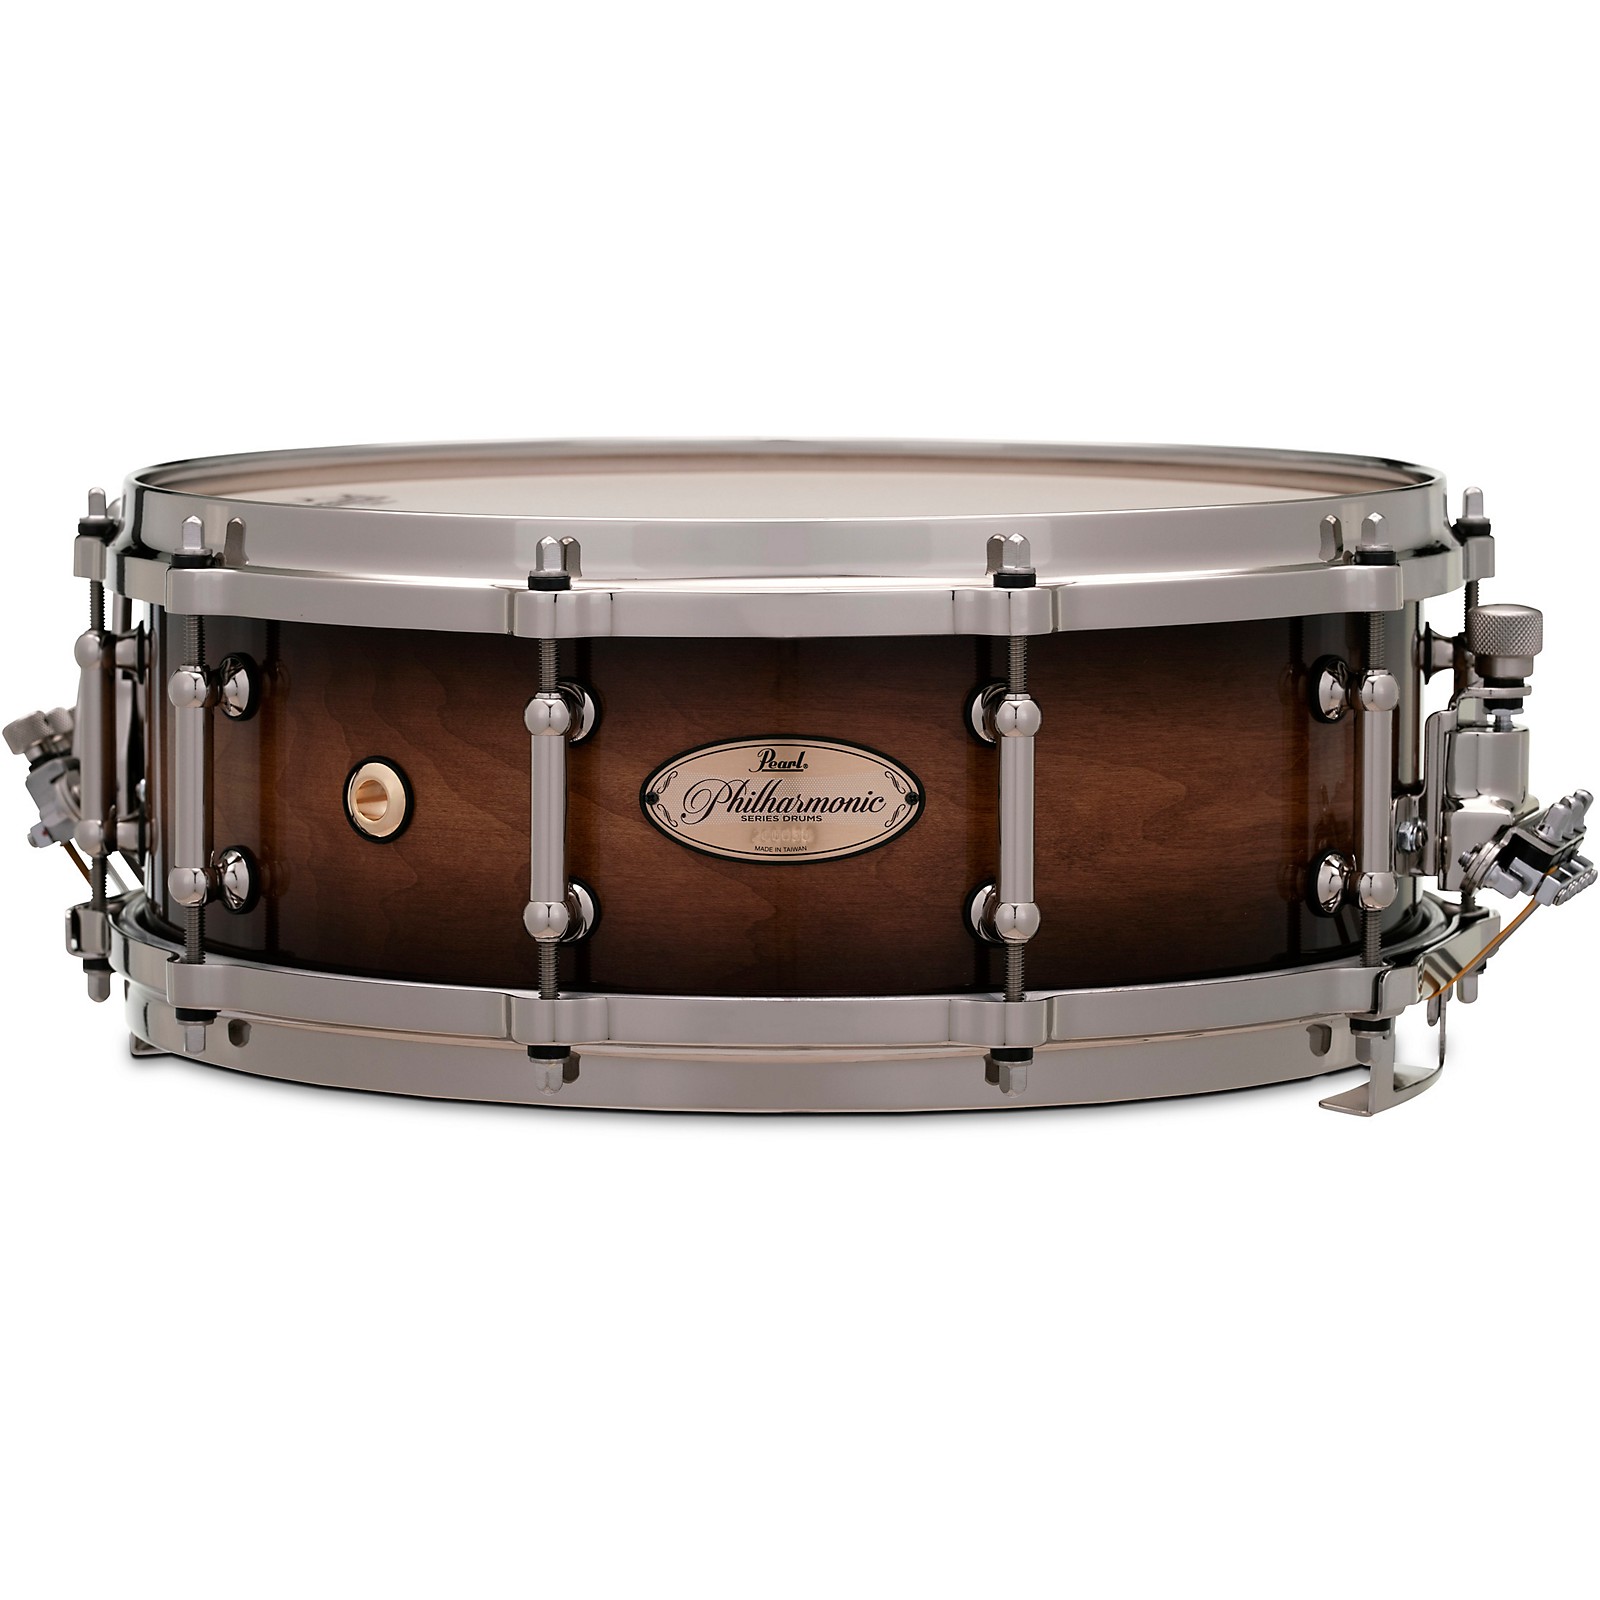 Pearl Philharmonic Maple Snare Drum 14 x 5 in. Gloss Barnwood Brown